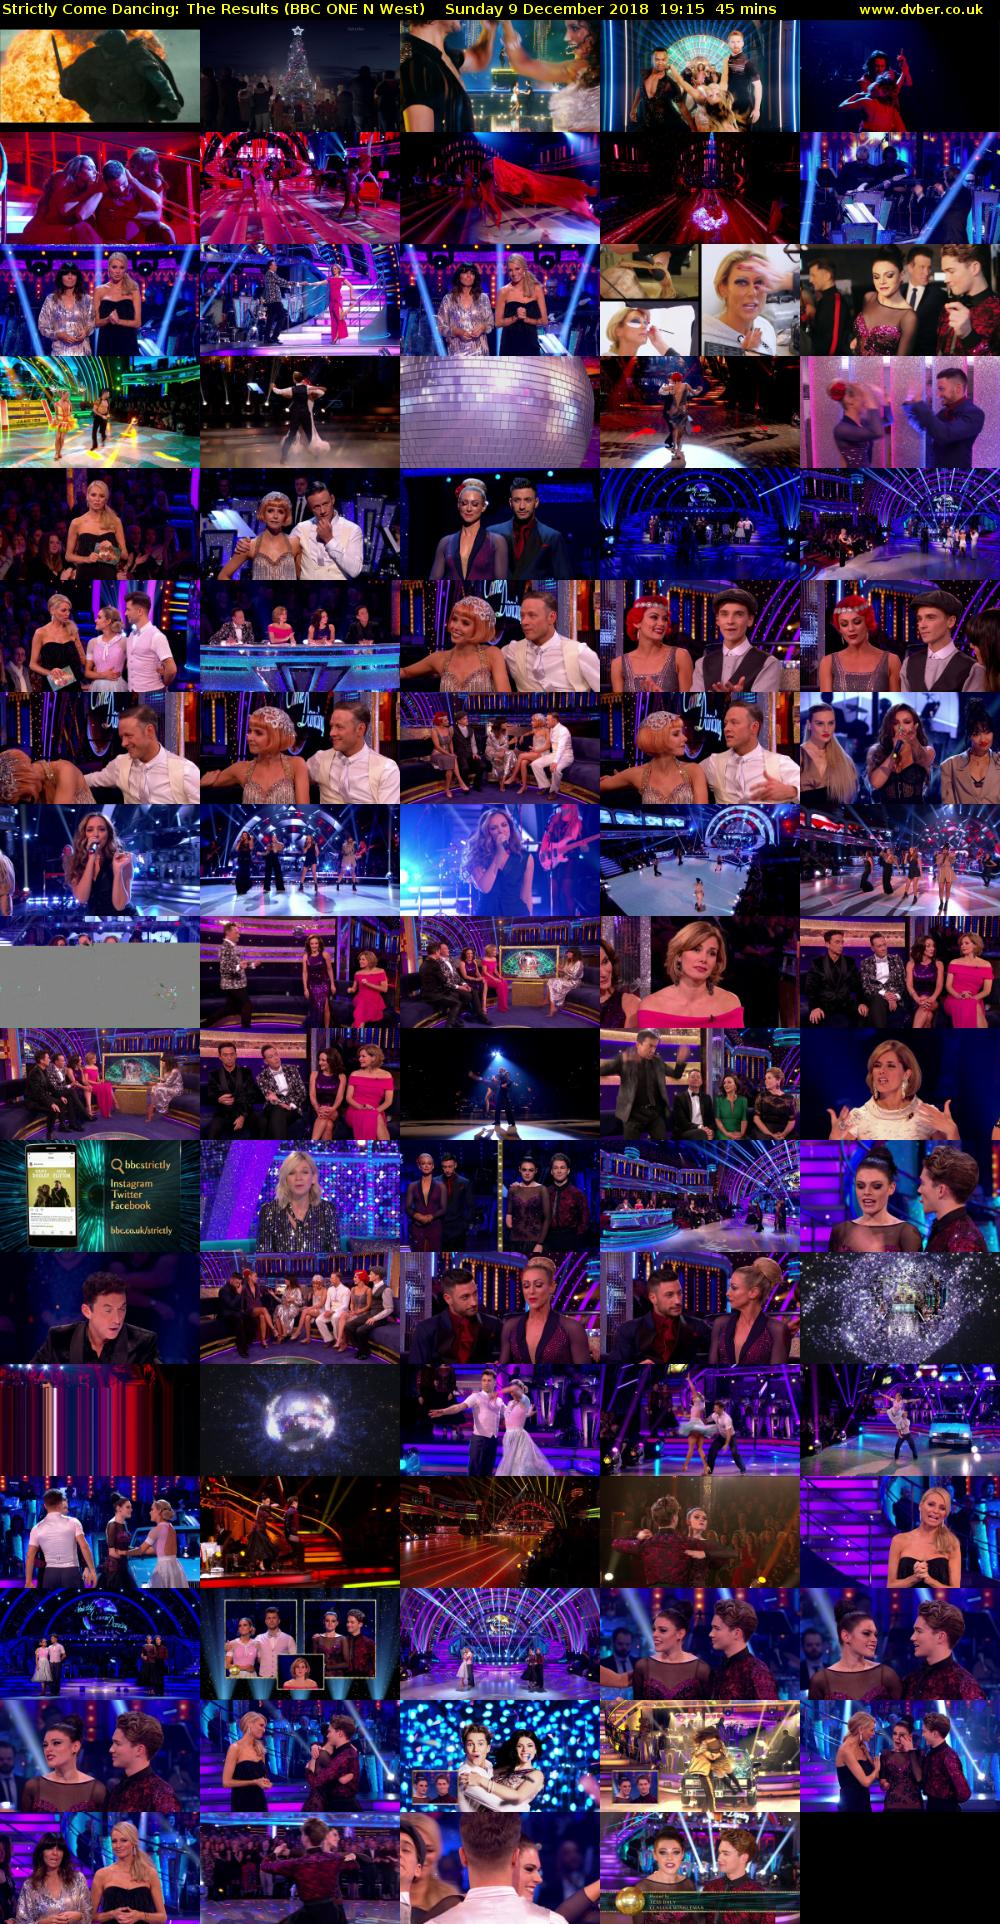 Strictly Come Dancing: The Results (BBC ONE N West) Sunday 9 December 2018 19:15 - 20:00